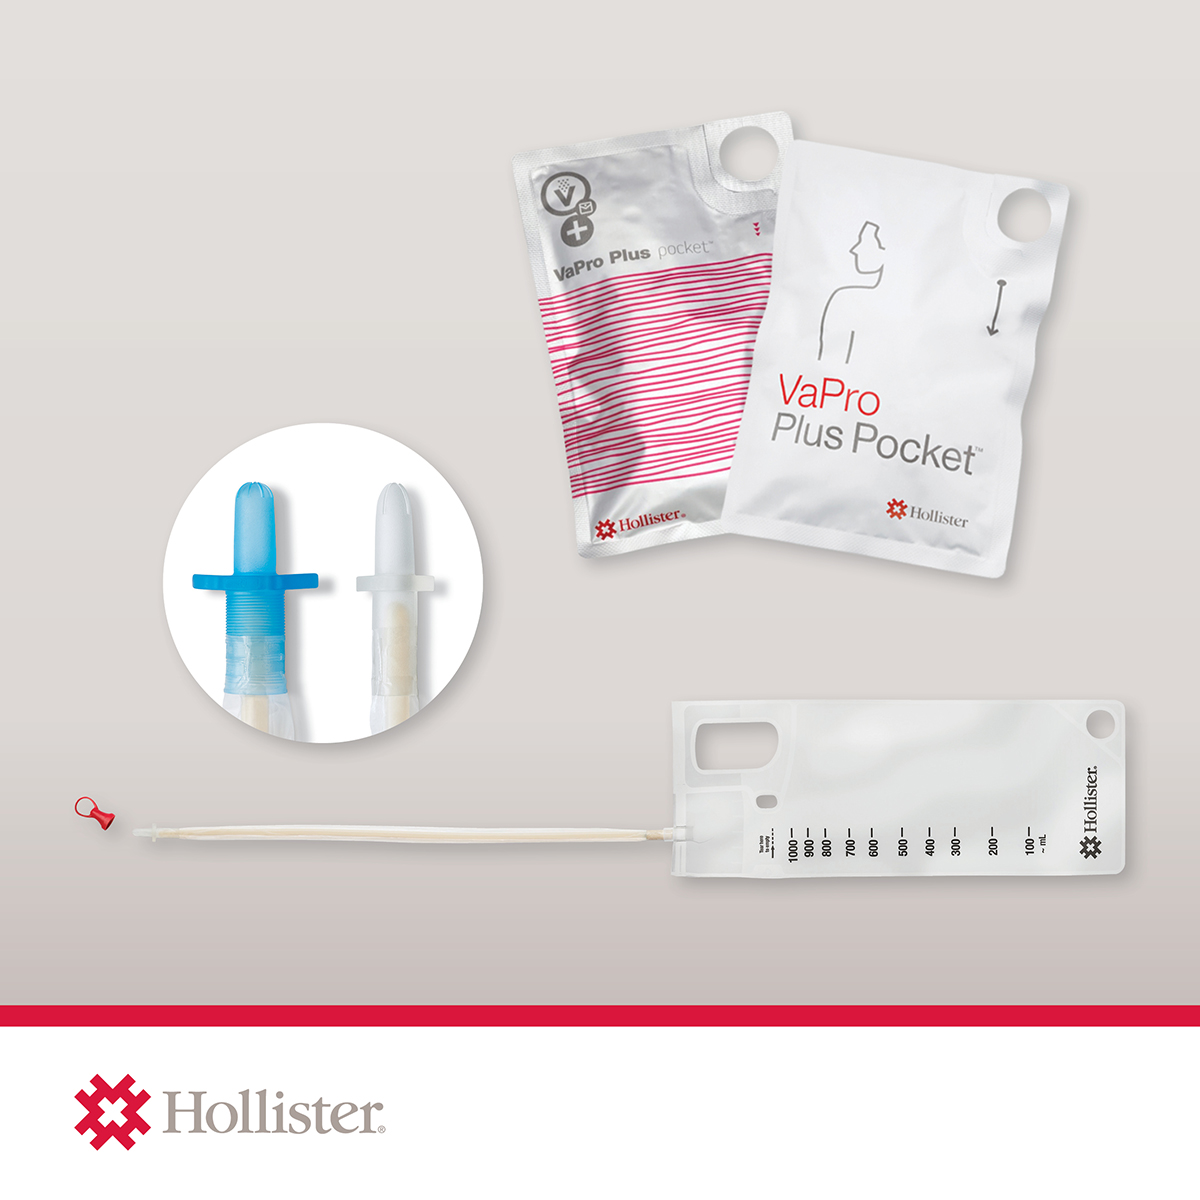 VaPro™ catheters from @HollisterInc provide 100% No Touch Protection with a protective cap, tip and sleeve, and they’re easy to use. Available in discreet, pocket-size packaging - with and without a collection bag. Learn more: link.hollister.com/3R8etcY